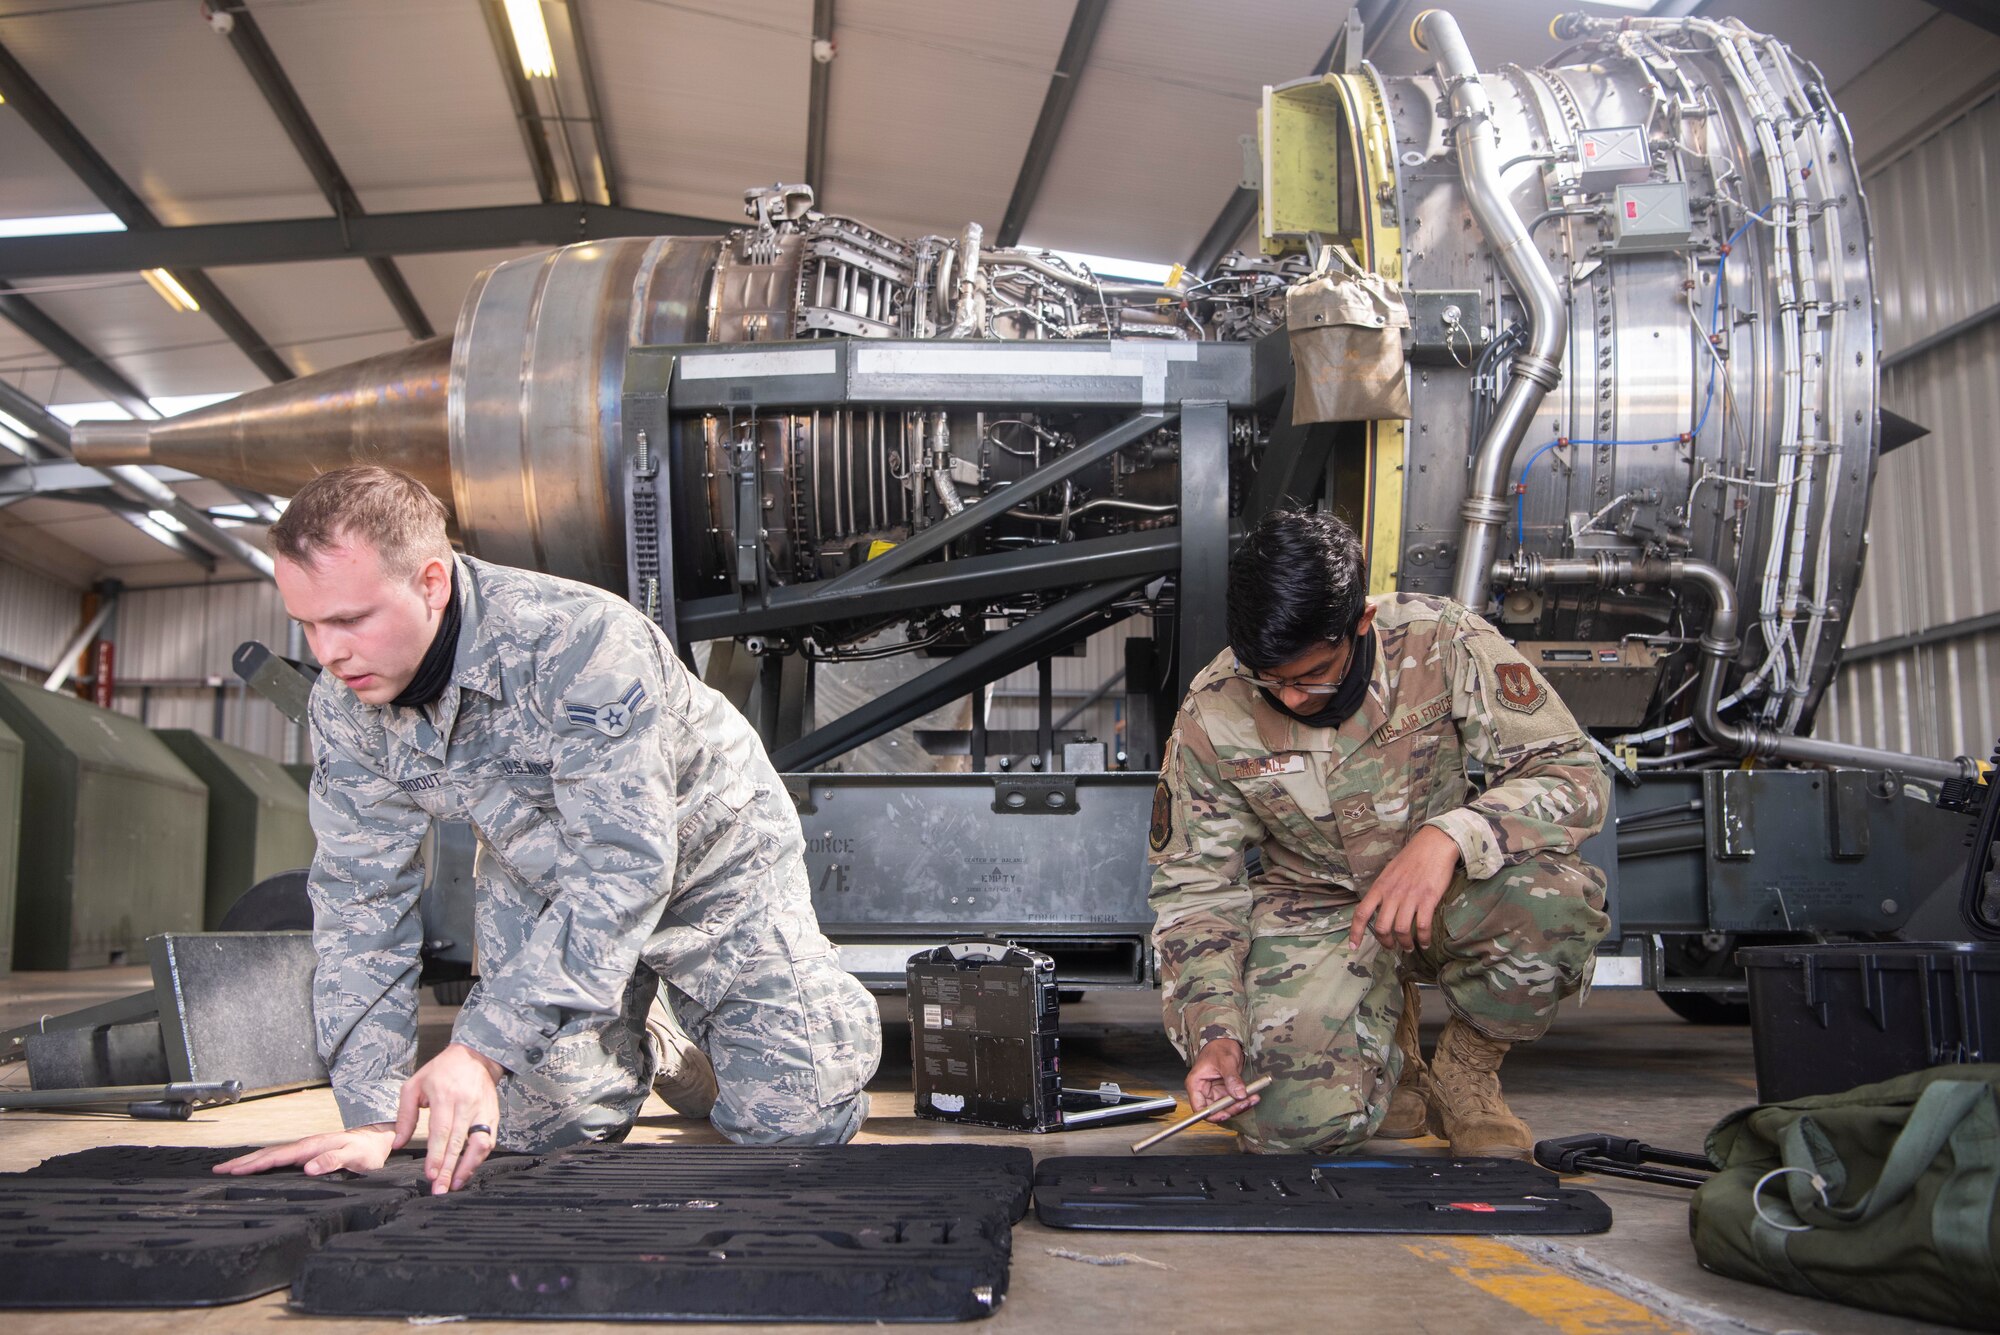 Airman 1st Class Eric Ridout and Airman 1st Class Rajendra Harilall, 100th Aircraft Maintenance Squadron aerospace propulsion journeymen, conduct a tool check at RAF Mildenhall, England, June 9, 2020. The tool check is accomplished to confirm all equipment is accounted for and no foreign object debris is left in the engine. (U.S. Air Force photo by Airman 1st Class Joseph Barron)